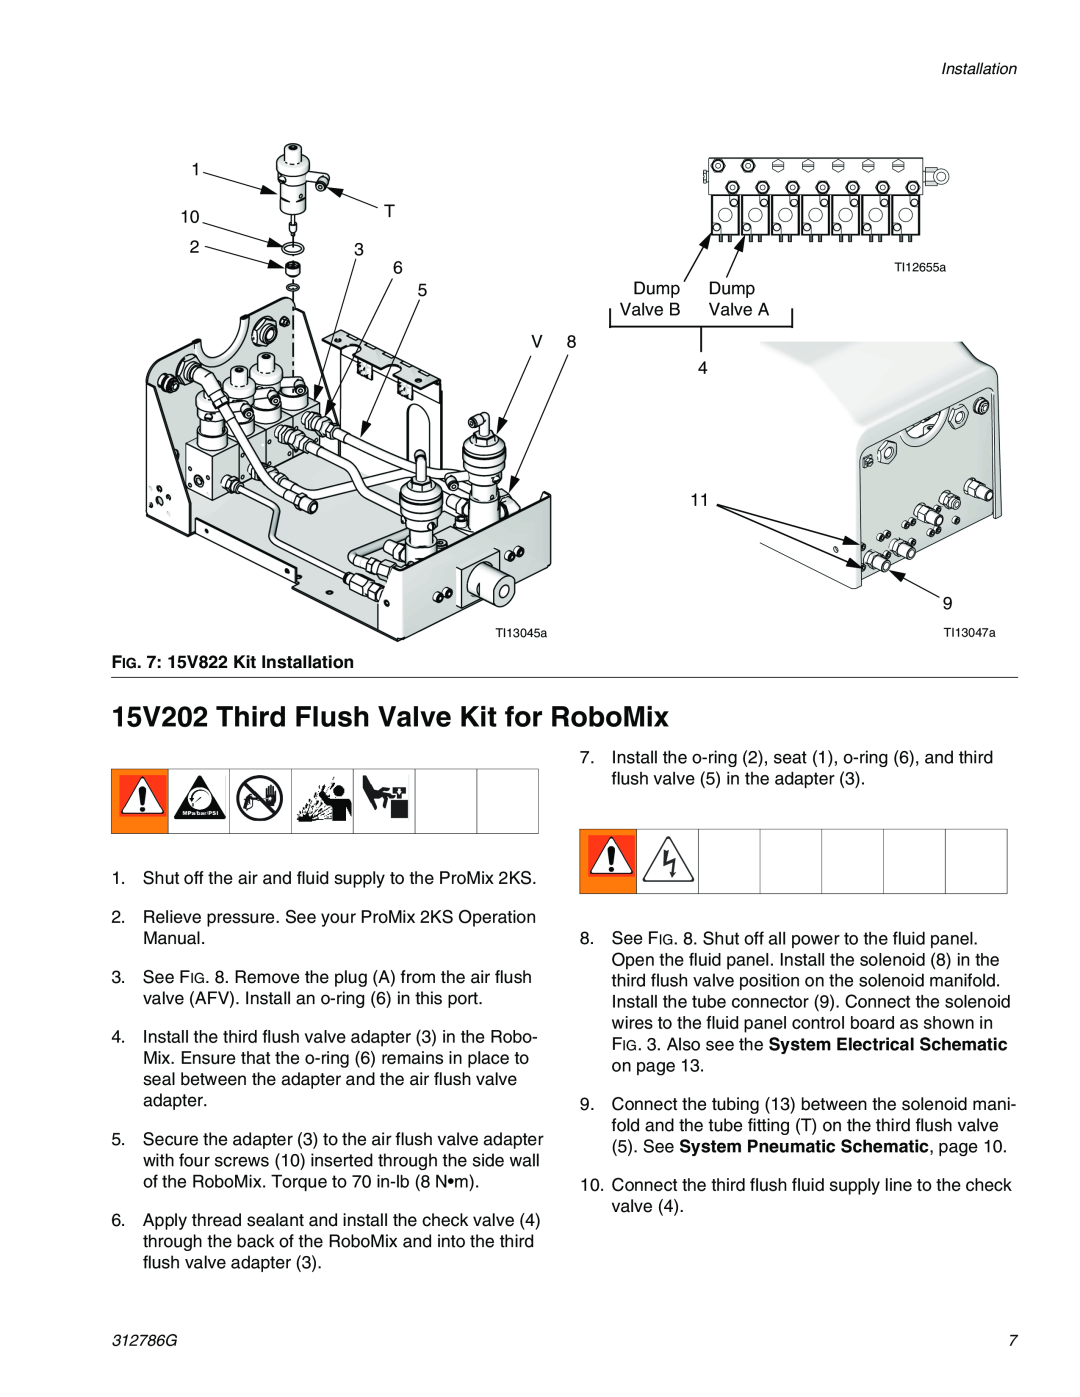 Graco TI12743a 15V202 Third Flush Valve Kit for RoboMix, 15V822 Kit Installation, See System Pneumatic Schematic, page 